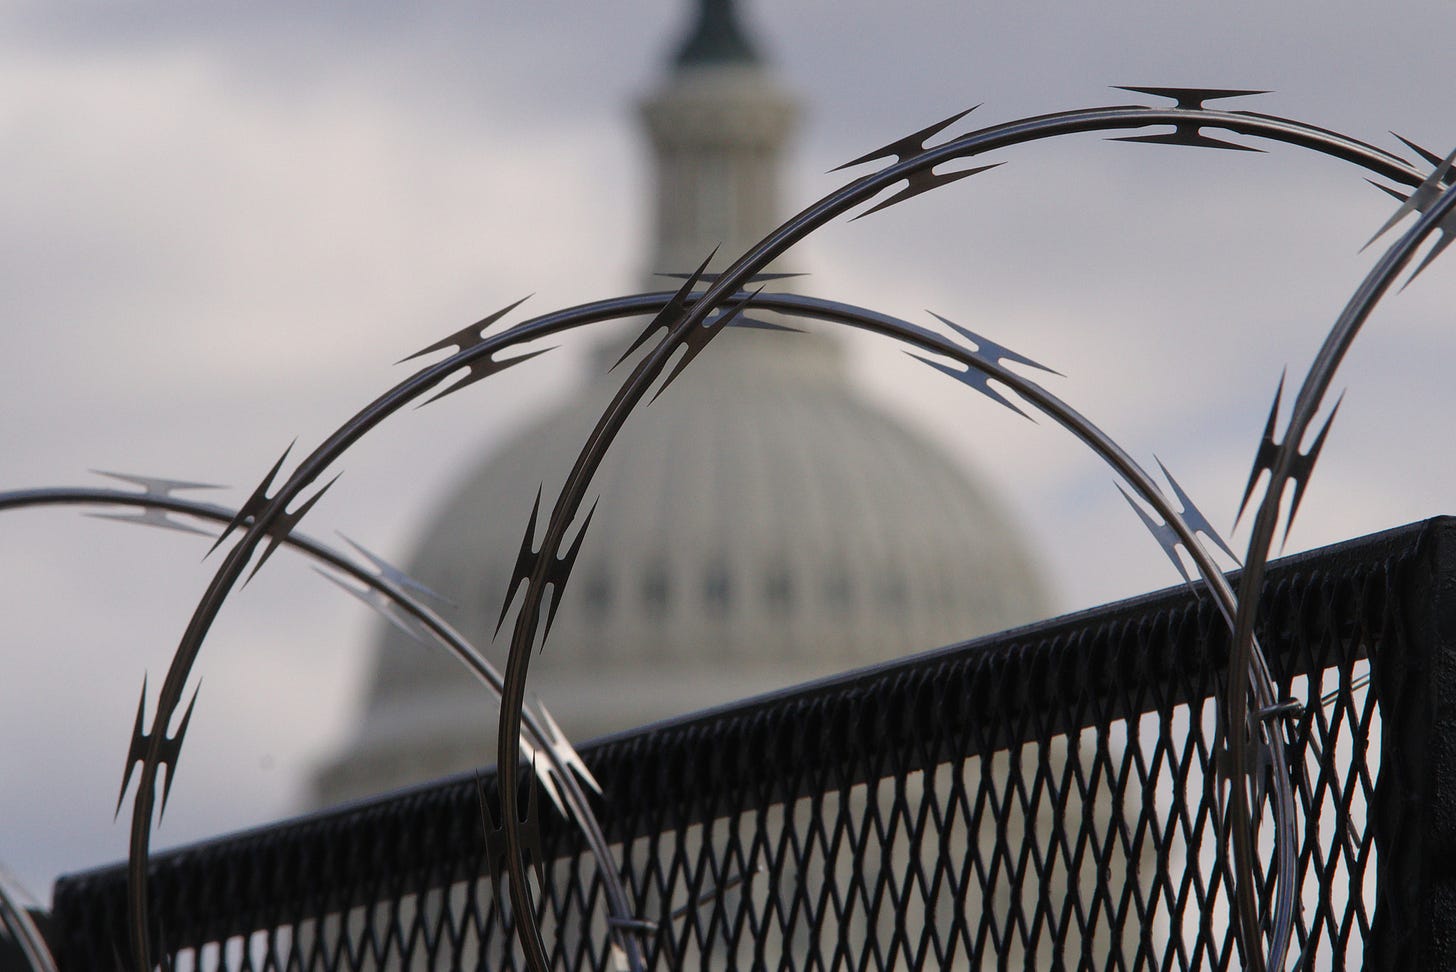 The U.S. Capitol with barbed wire in the foreground.